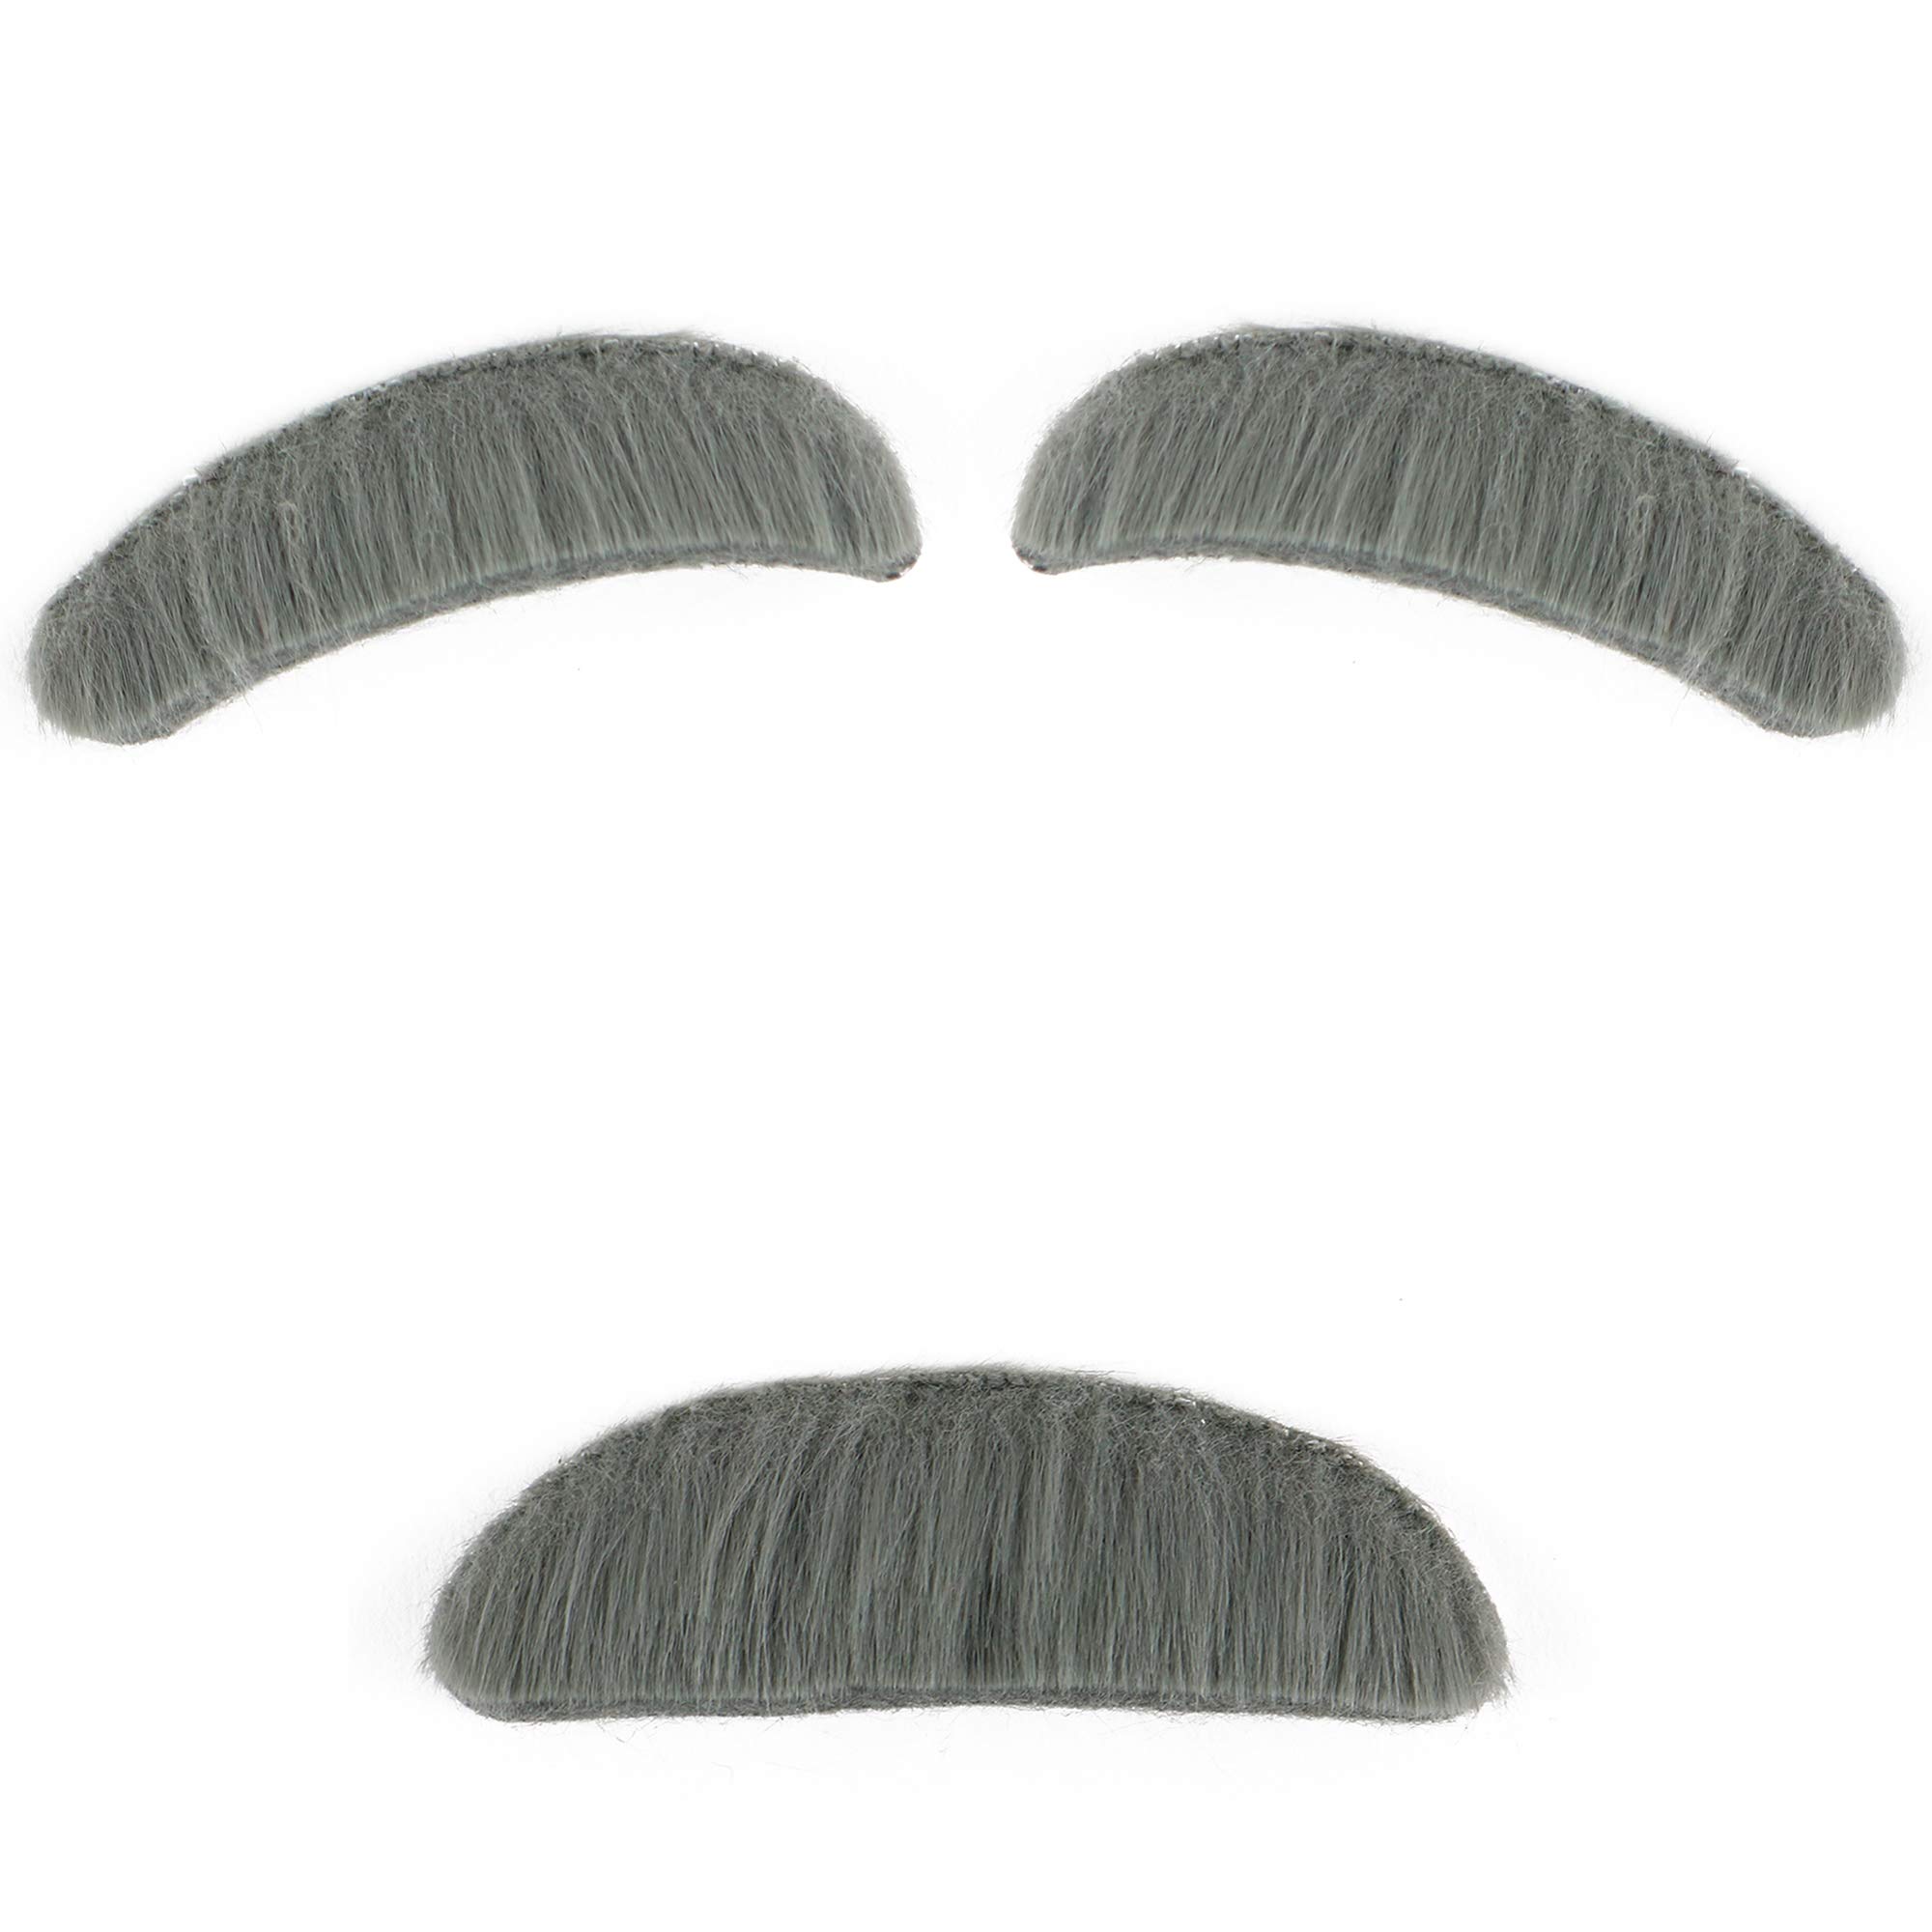 Skeleteen Eyebrow and Mustache Set - Old Man Bushy Stick On Fake Grey Eyebrows and Moustache Kit for Men, Women and Children